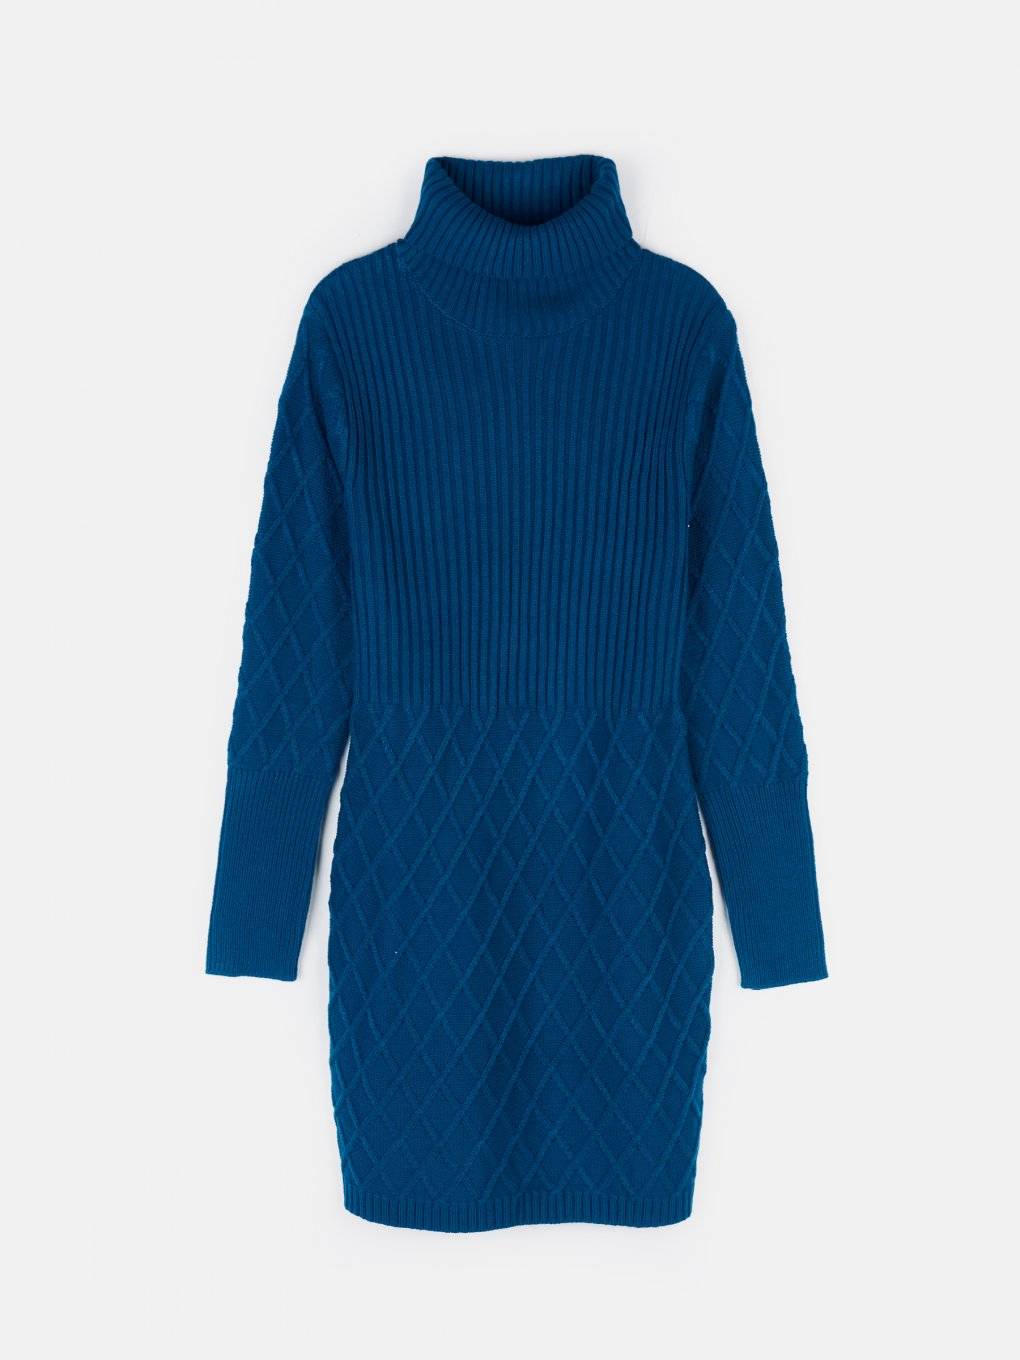 Ladies roll neck knitted dress